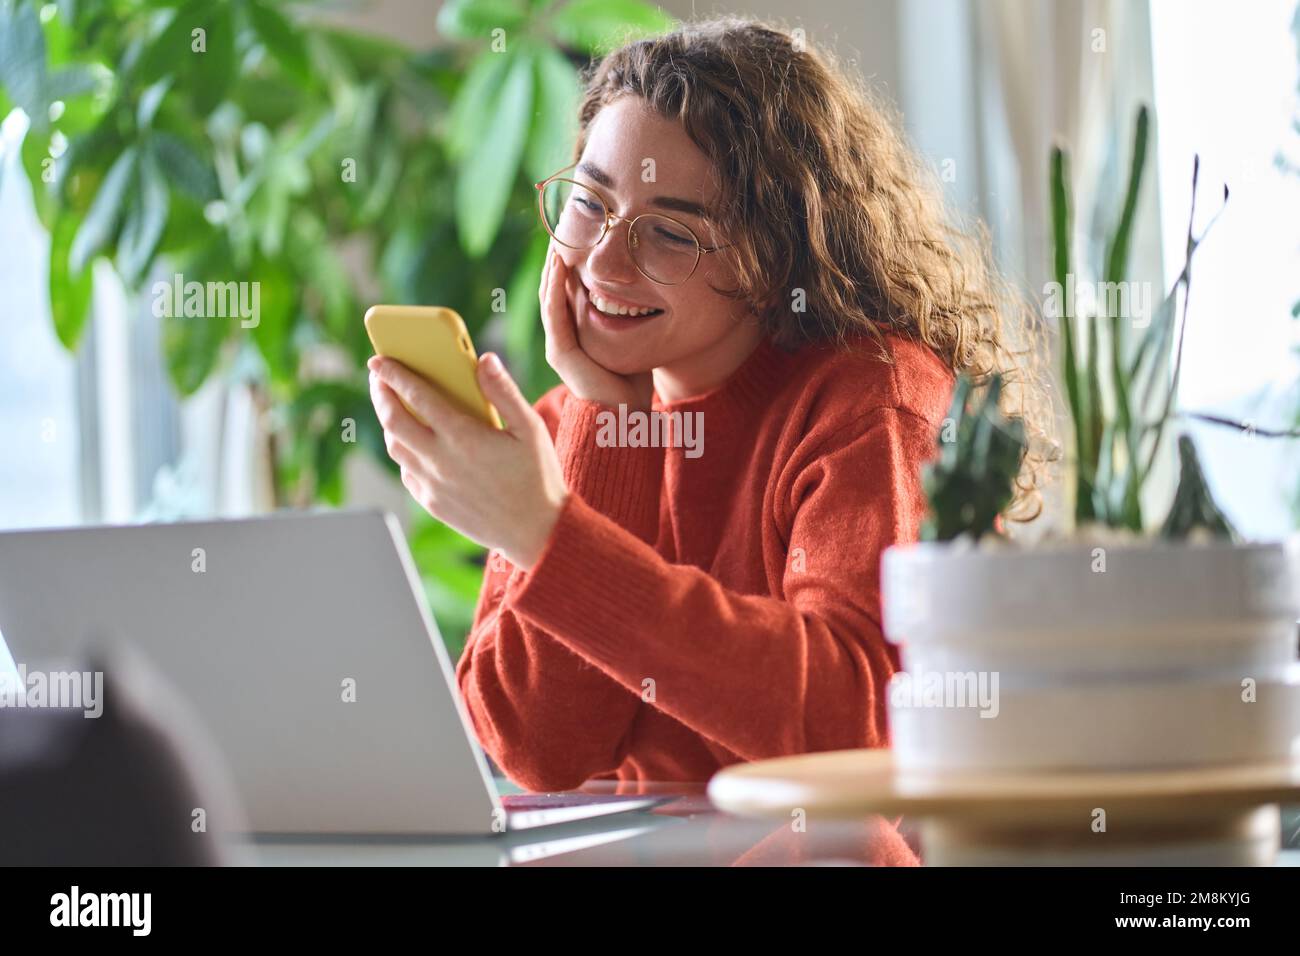 Young smiling woman holding smartphone using cellphone sitting at table. Stock Photo